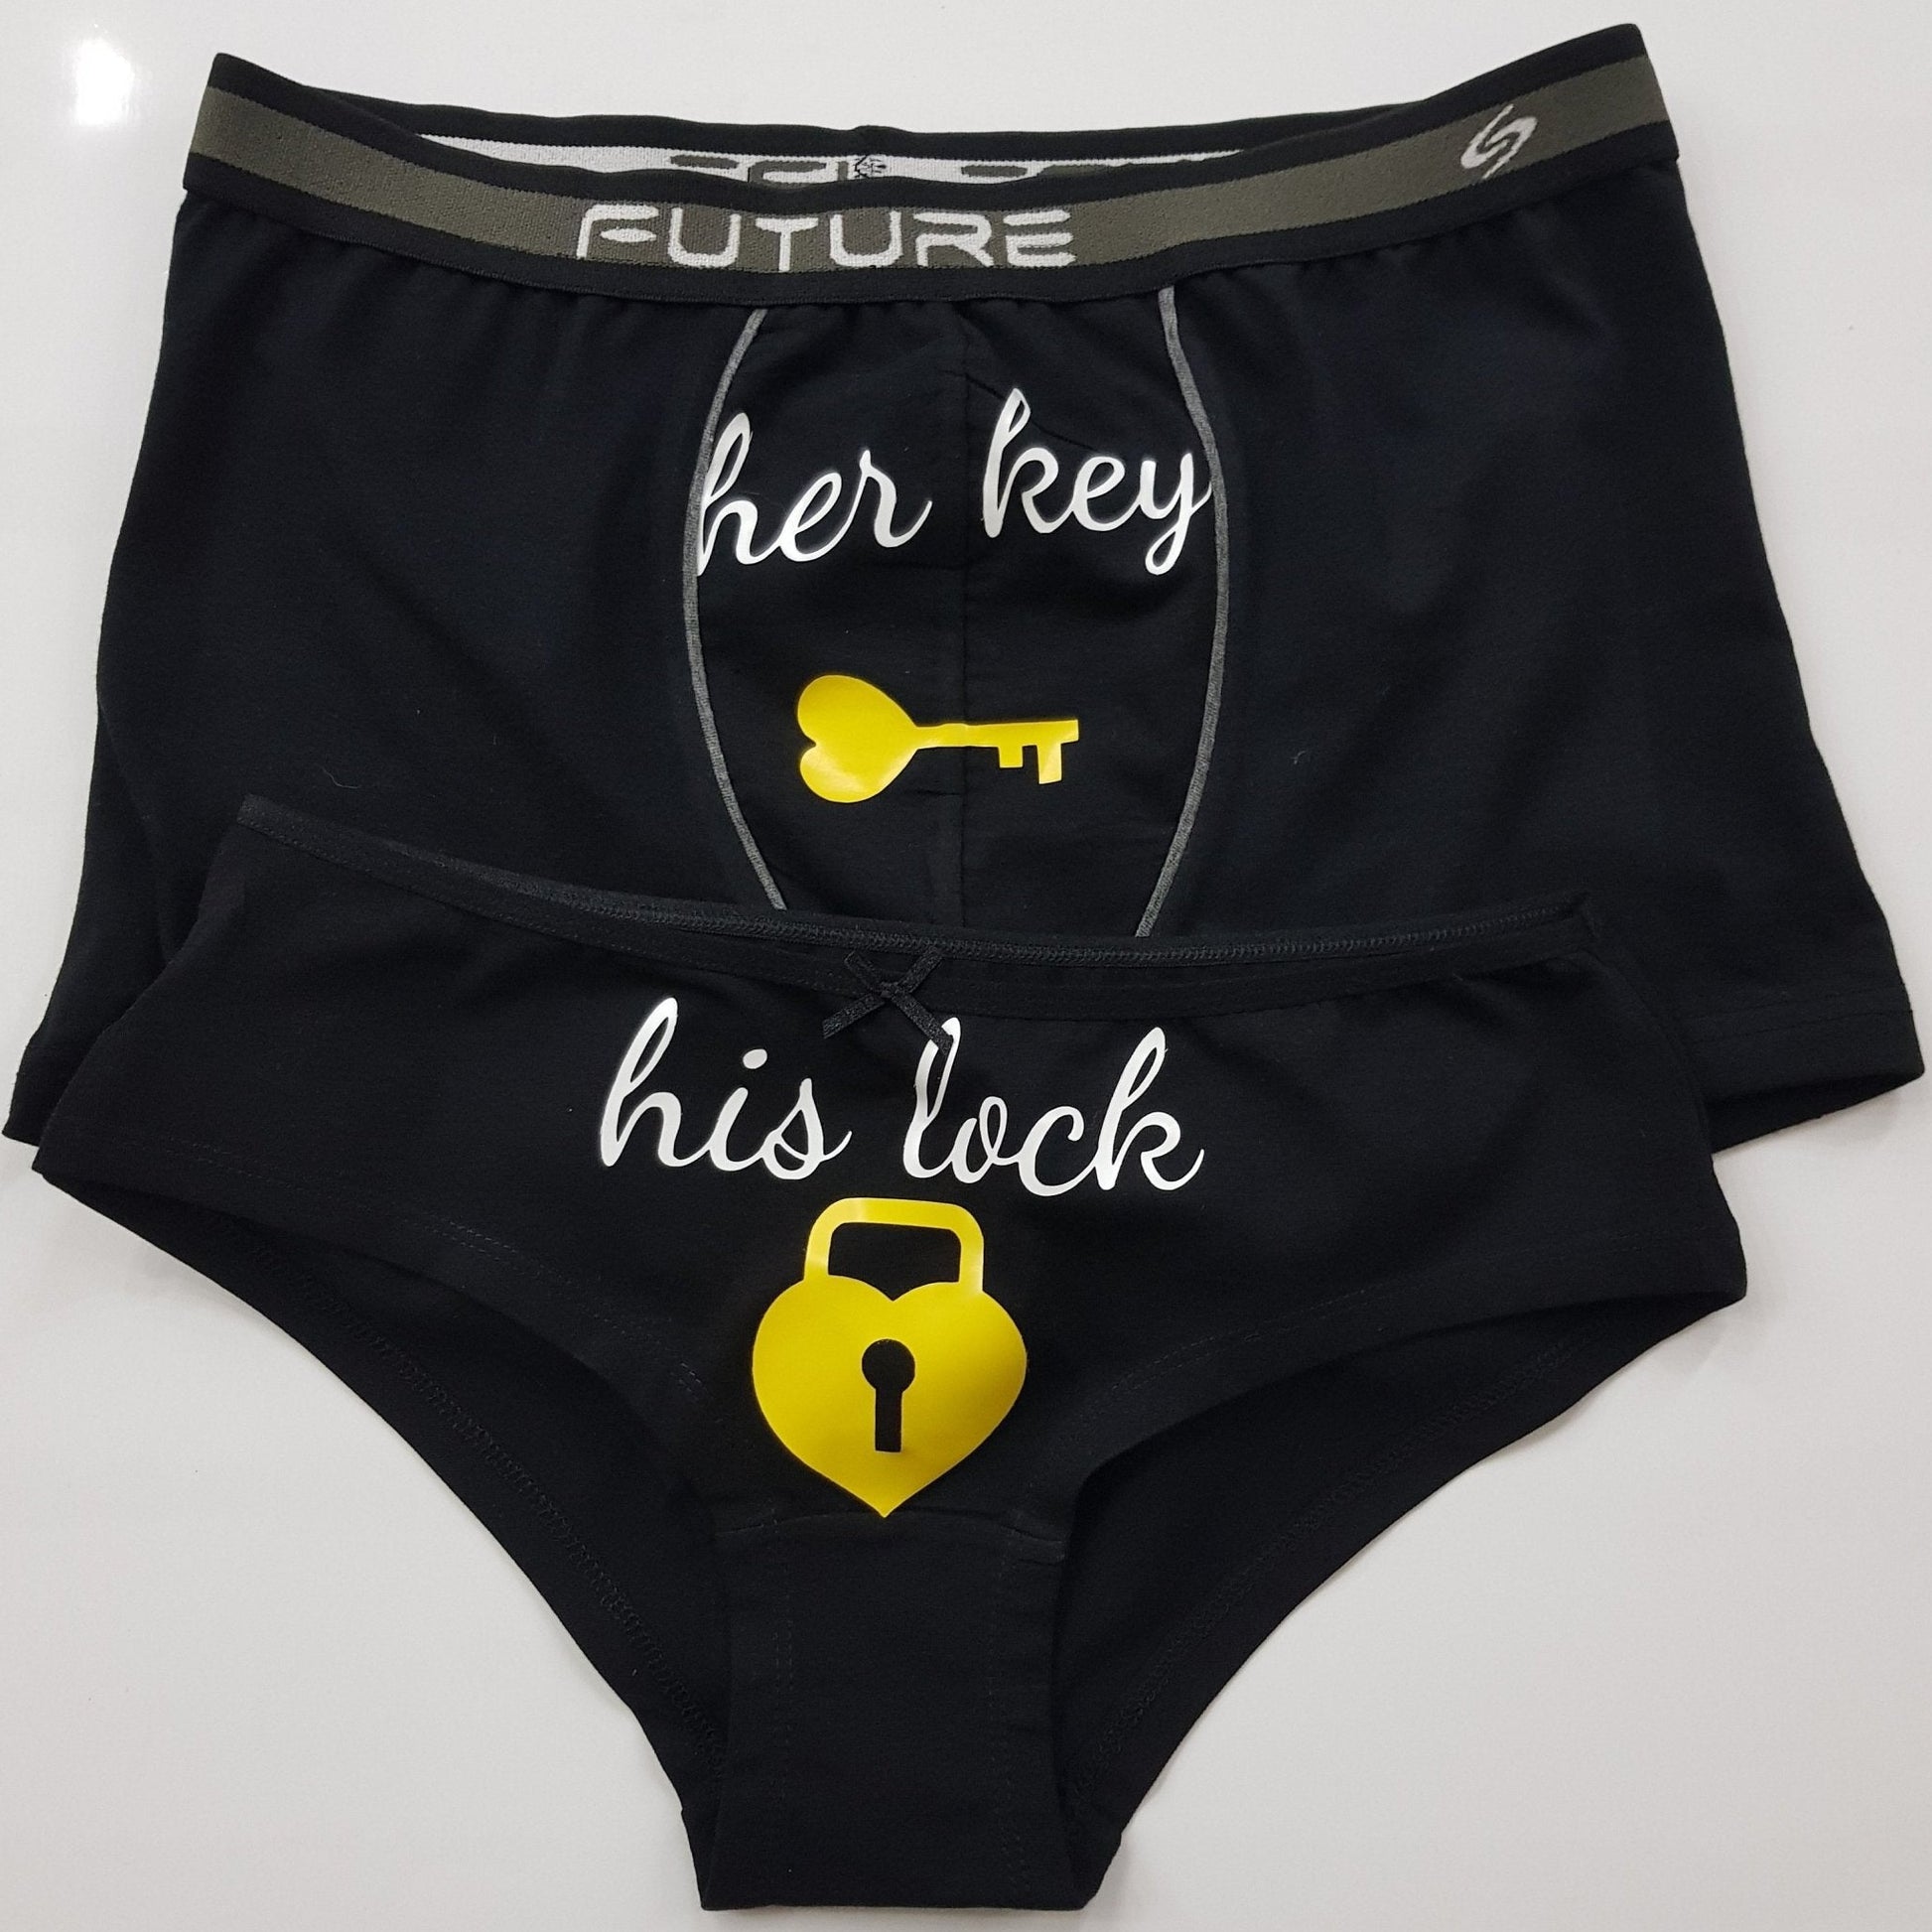 Matching underwear for couples black